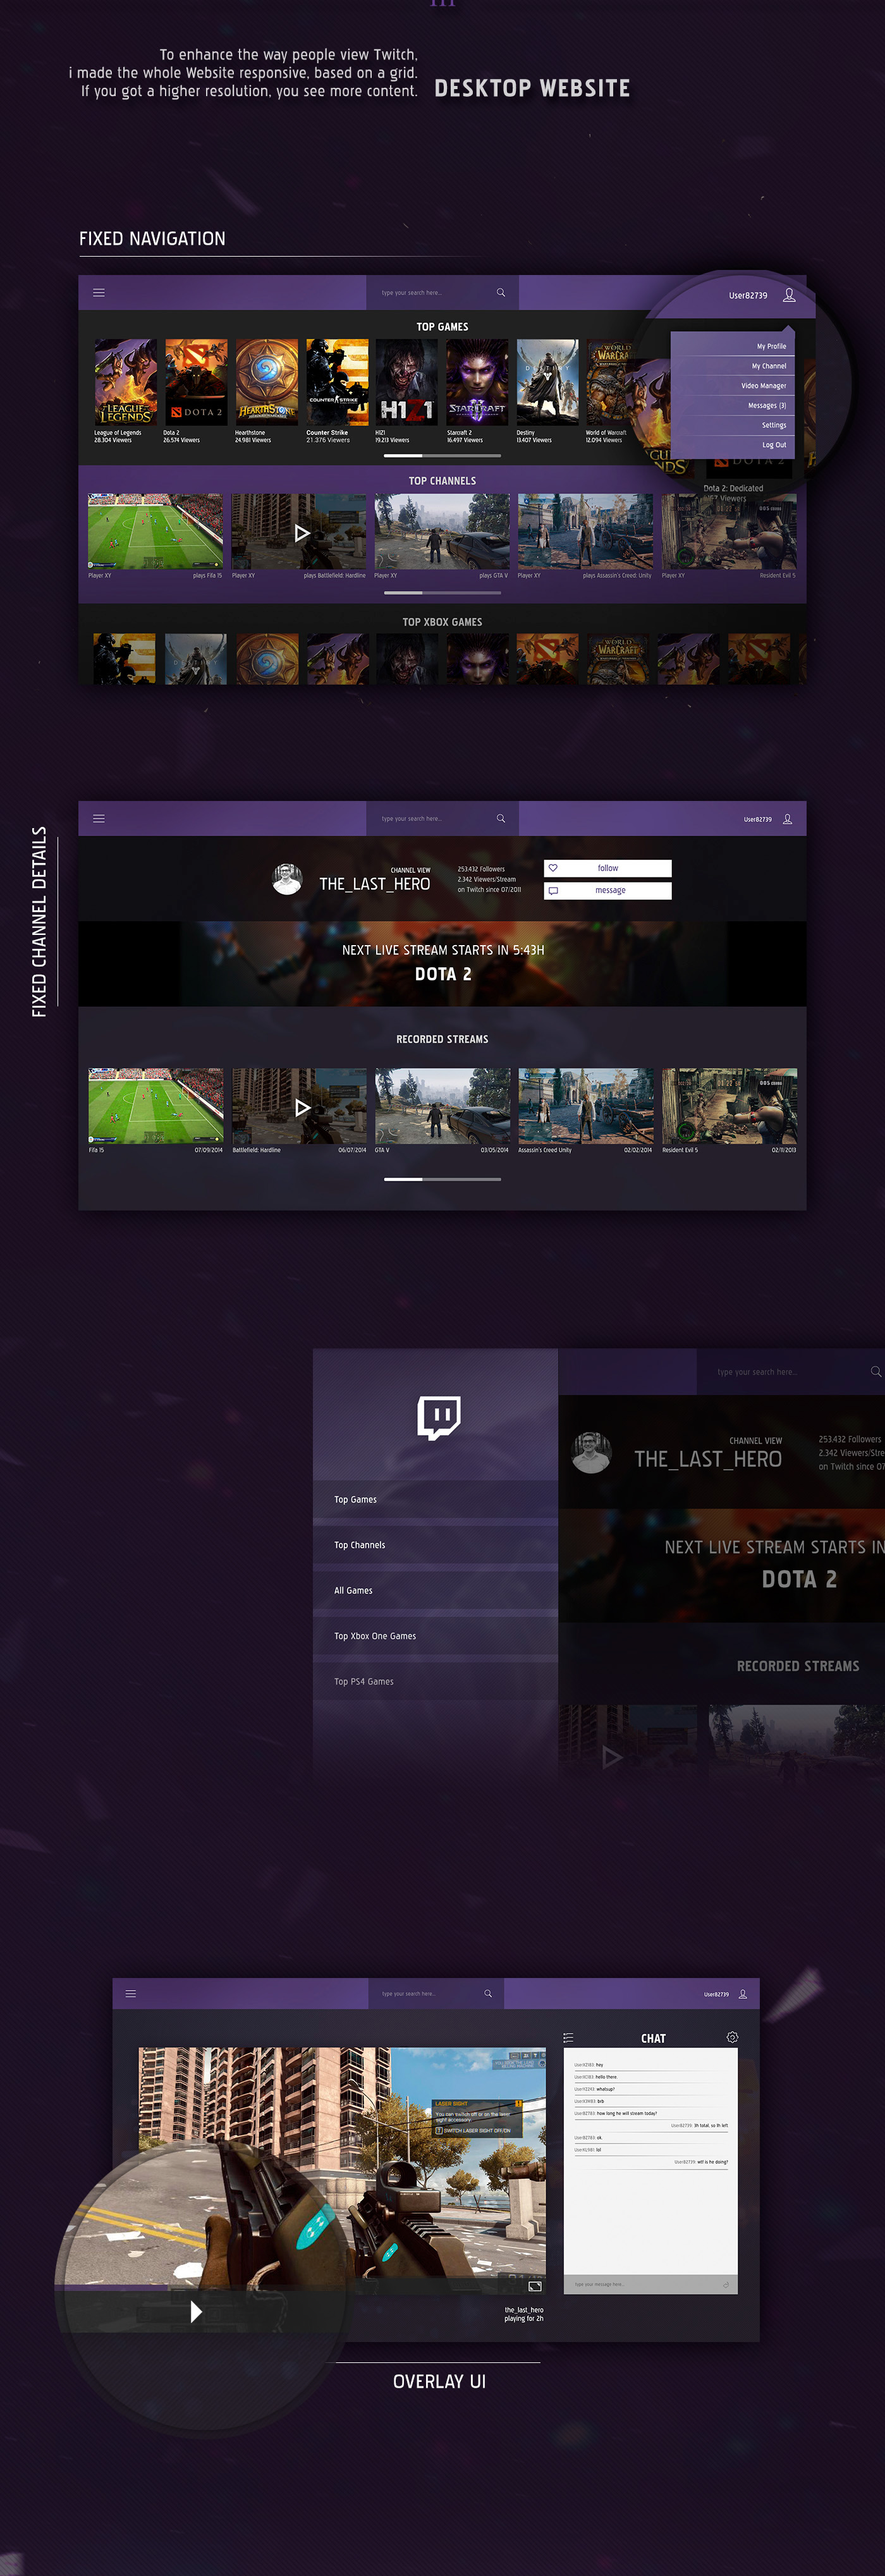 Twitch redesign UI ux reponsive Game Streaming user interface user experience Overlay Webdesign Gaming photoshop new update